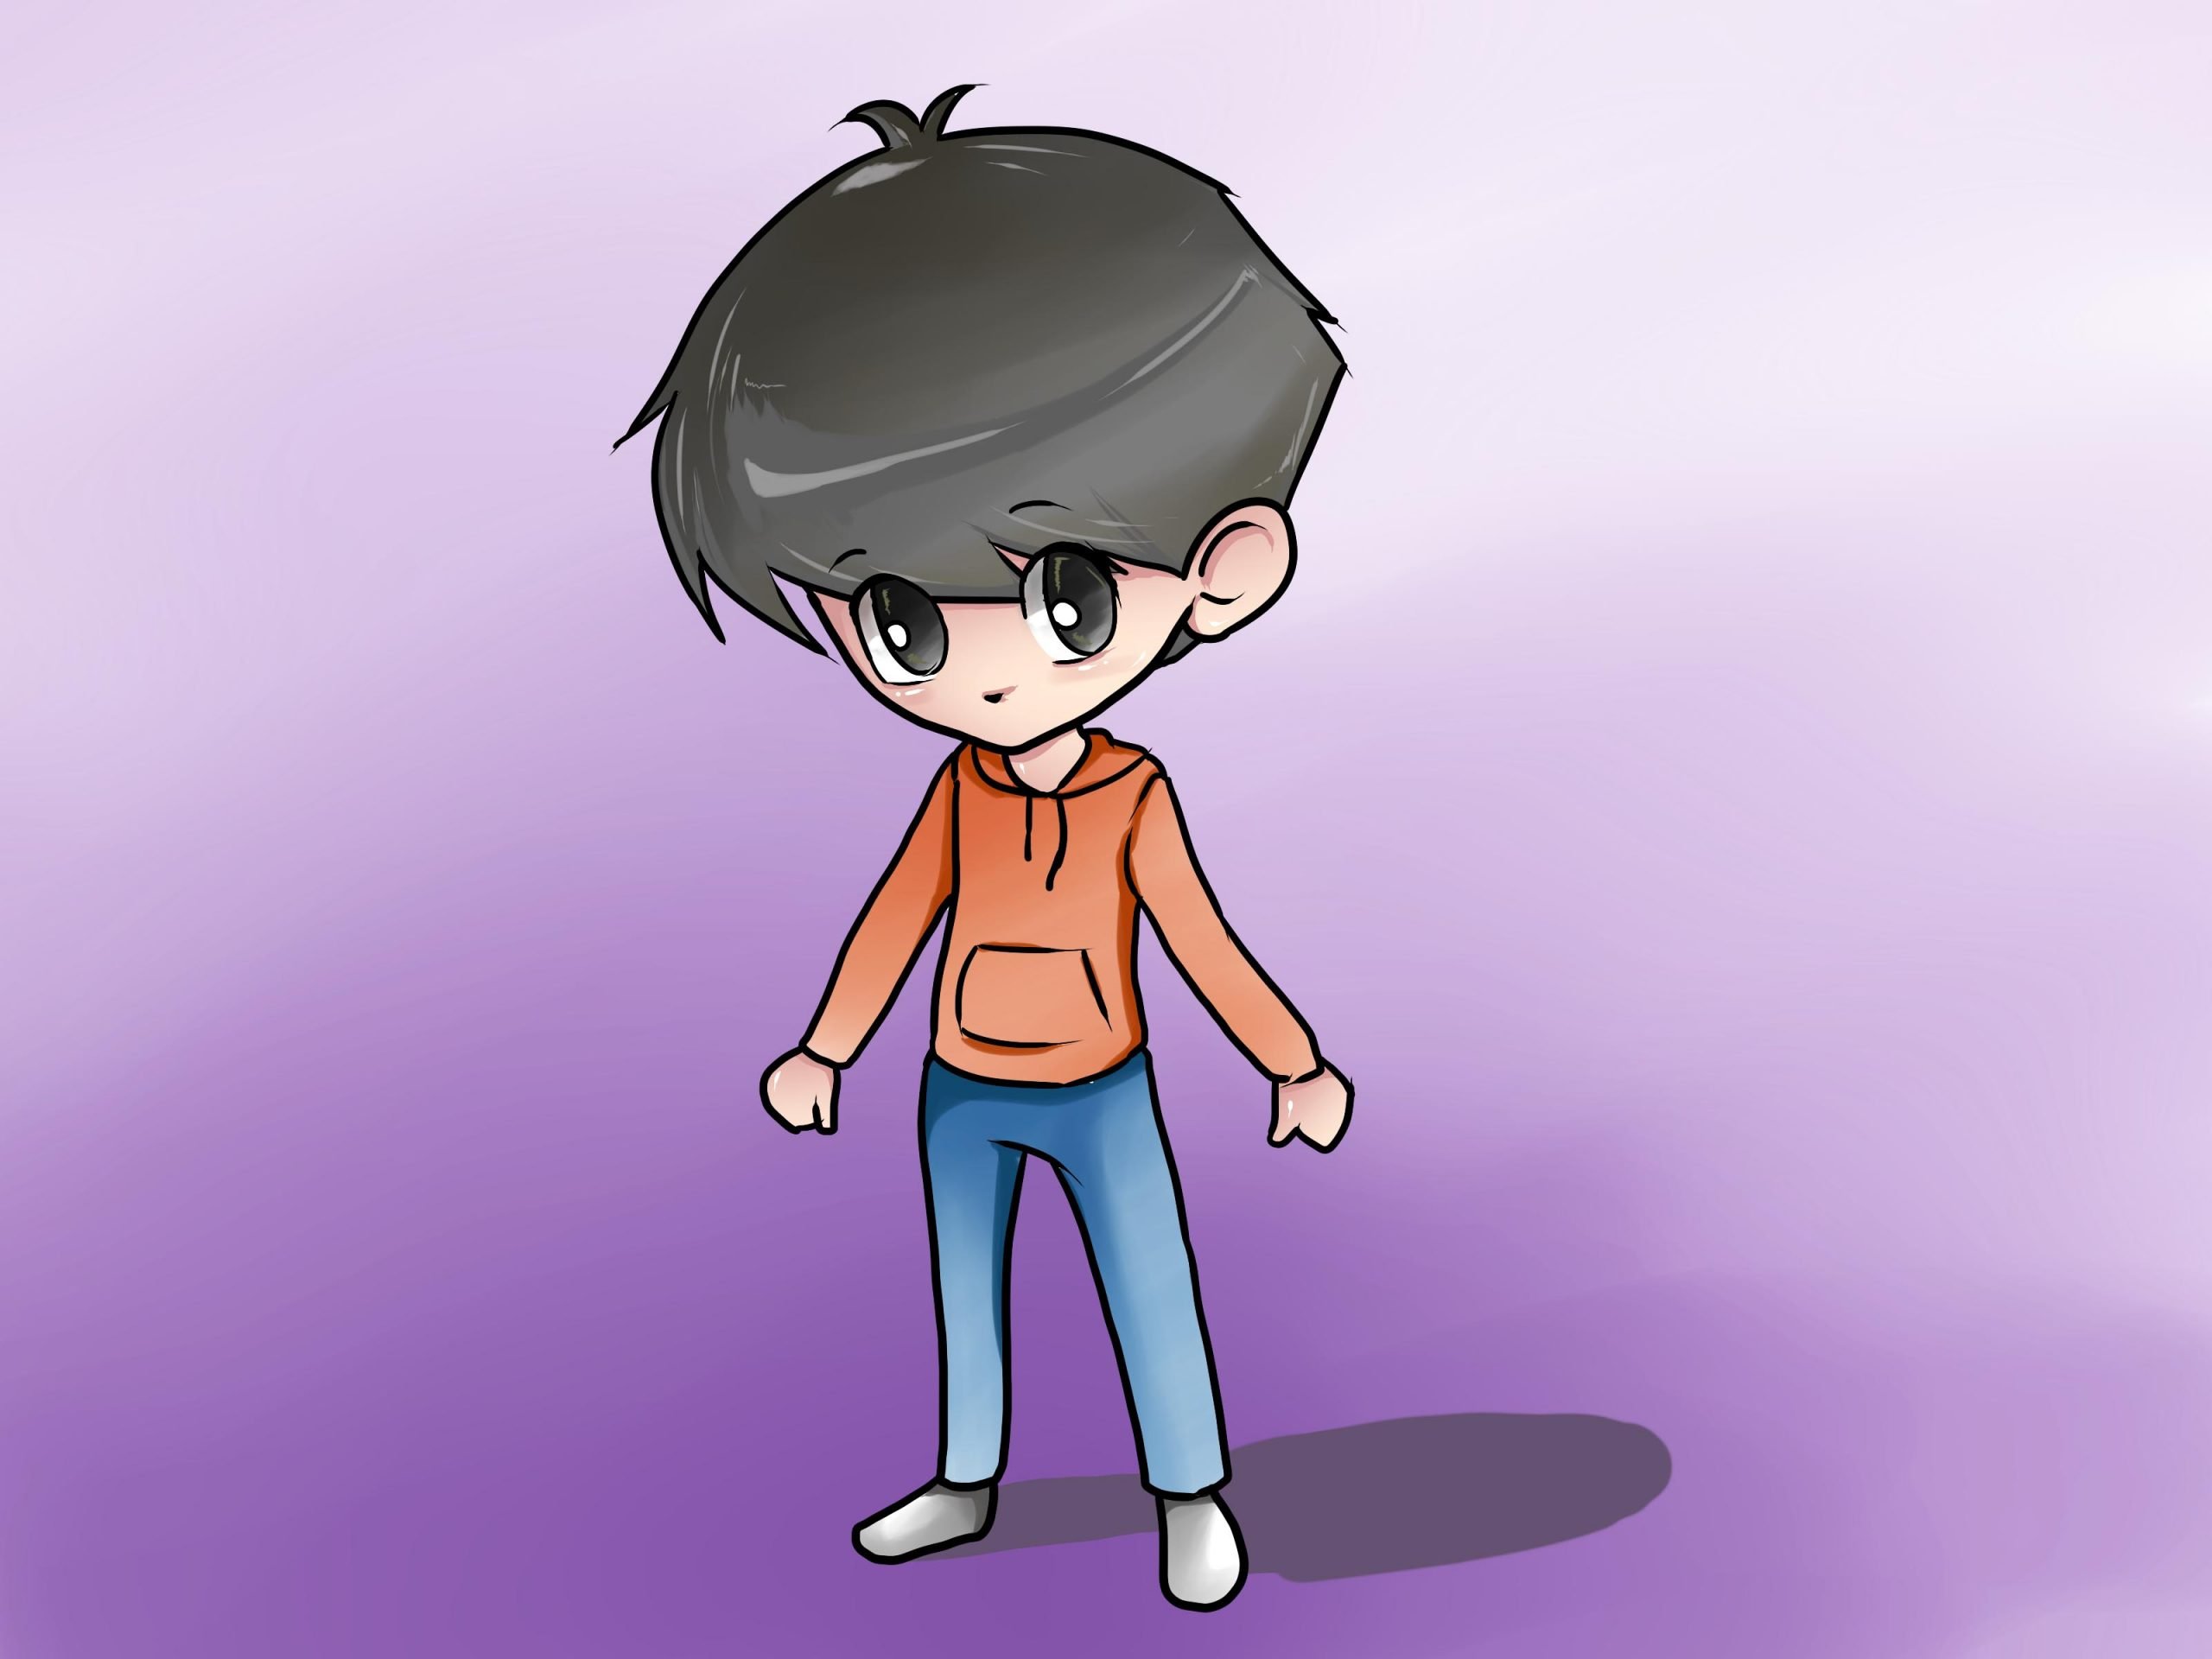 How to Draw a Chibi Boy (with Pictures)